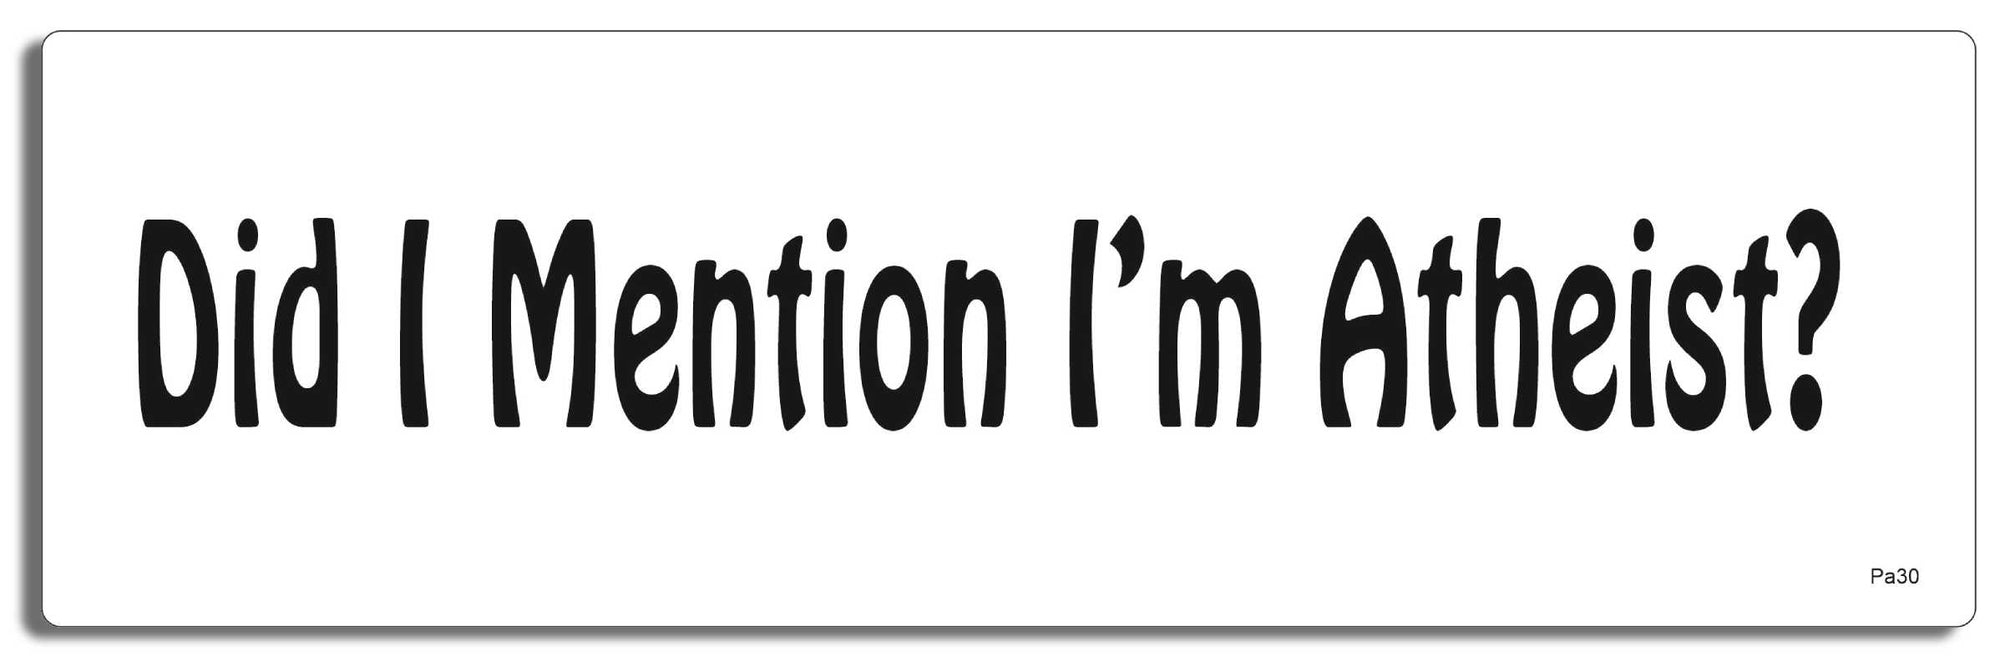 Did I mention I'm Atheist? - 3" x 10" -  Decal Bumper Sticker-pagan Bumper Sticker Car Magnet Did I mention I'm Atheist?-  Decal for carsatheist, pagan, wiccan, witch